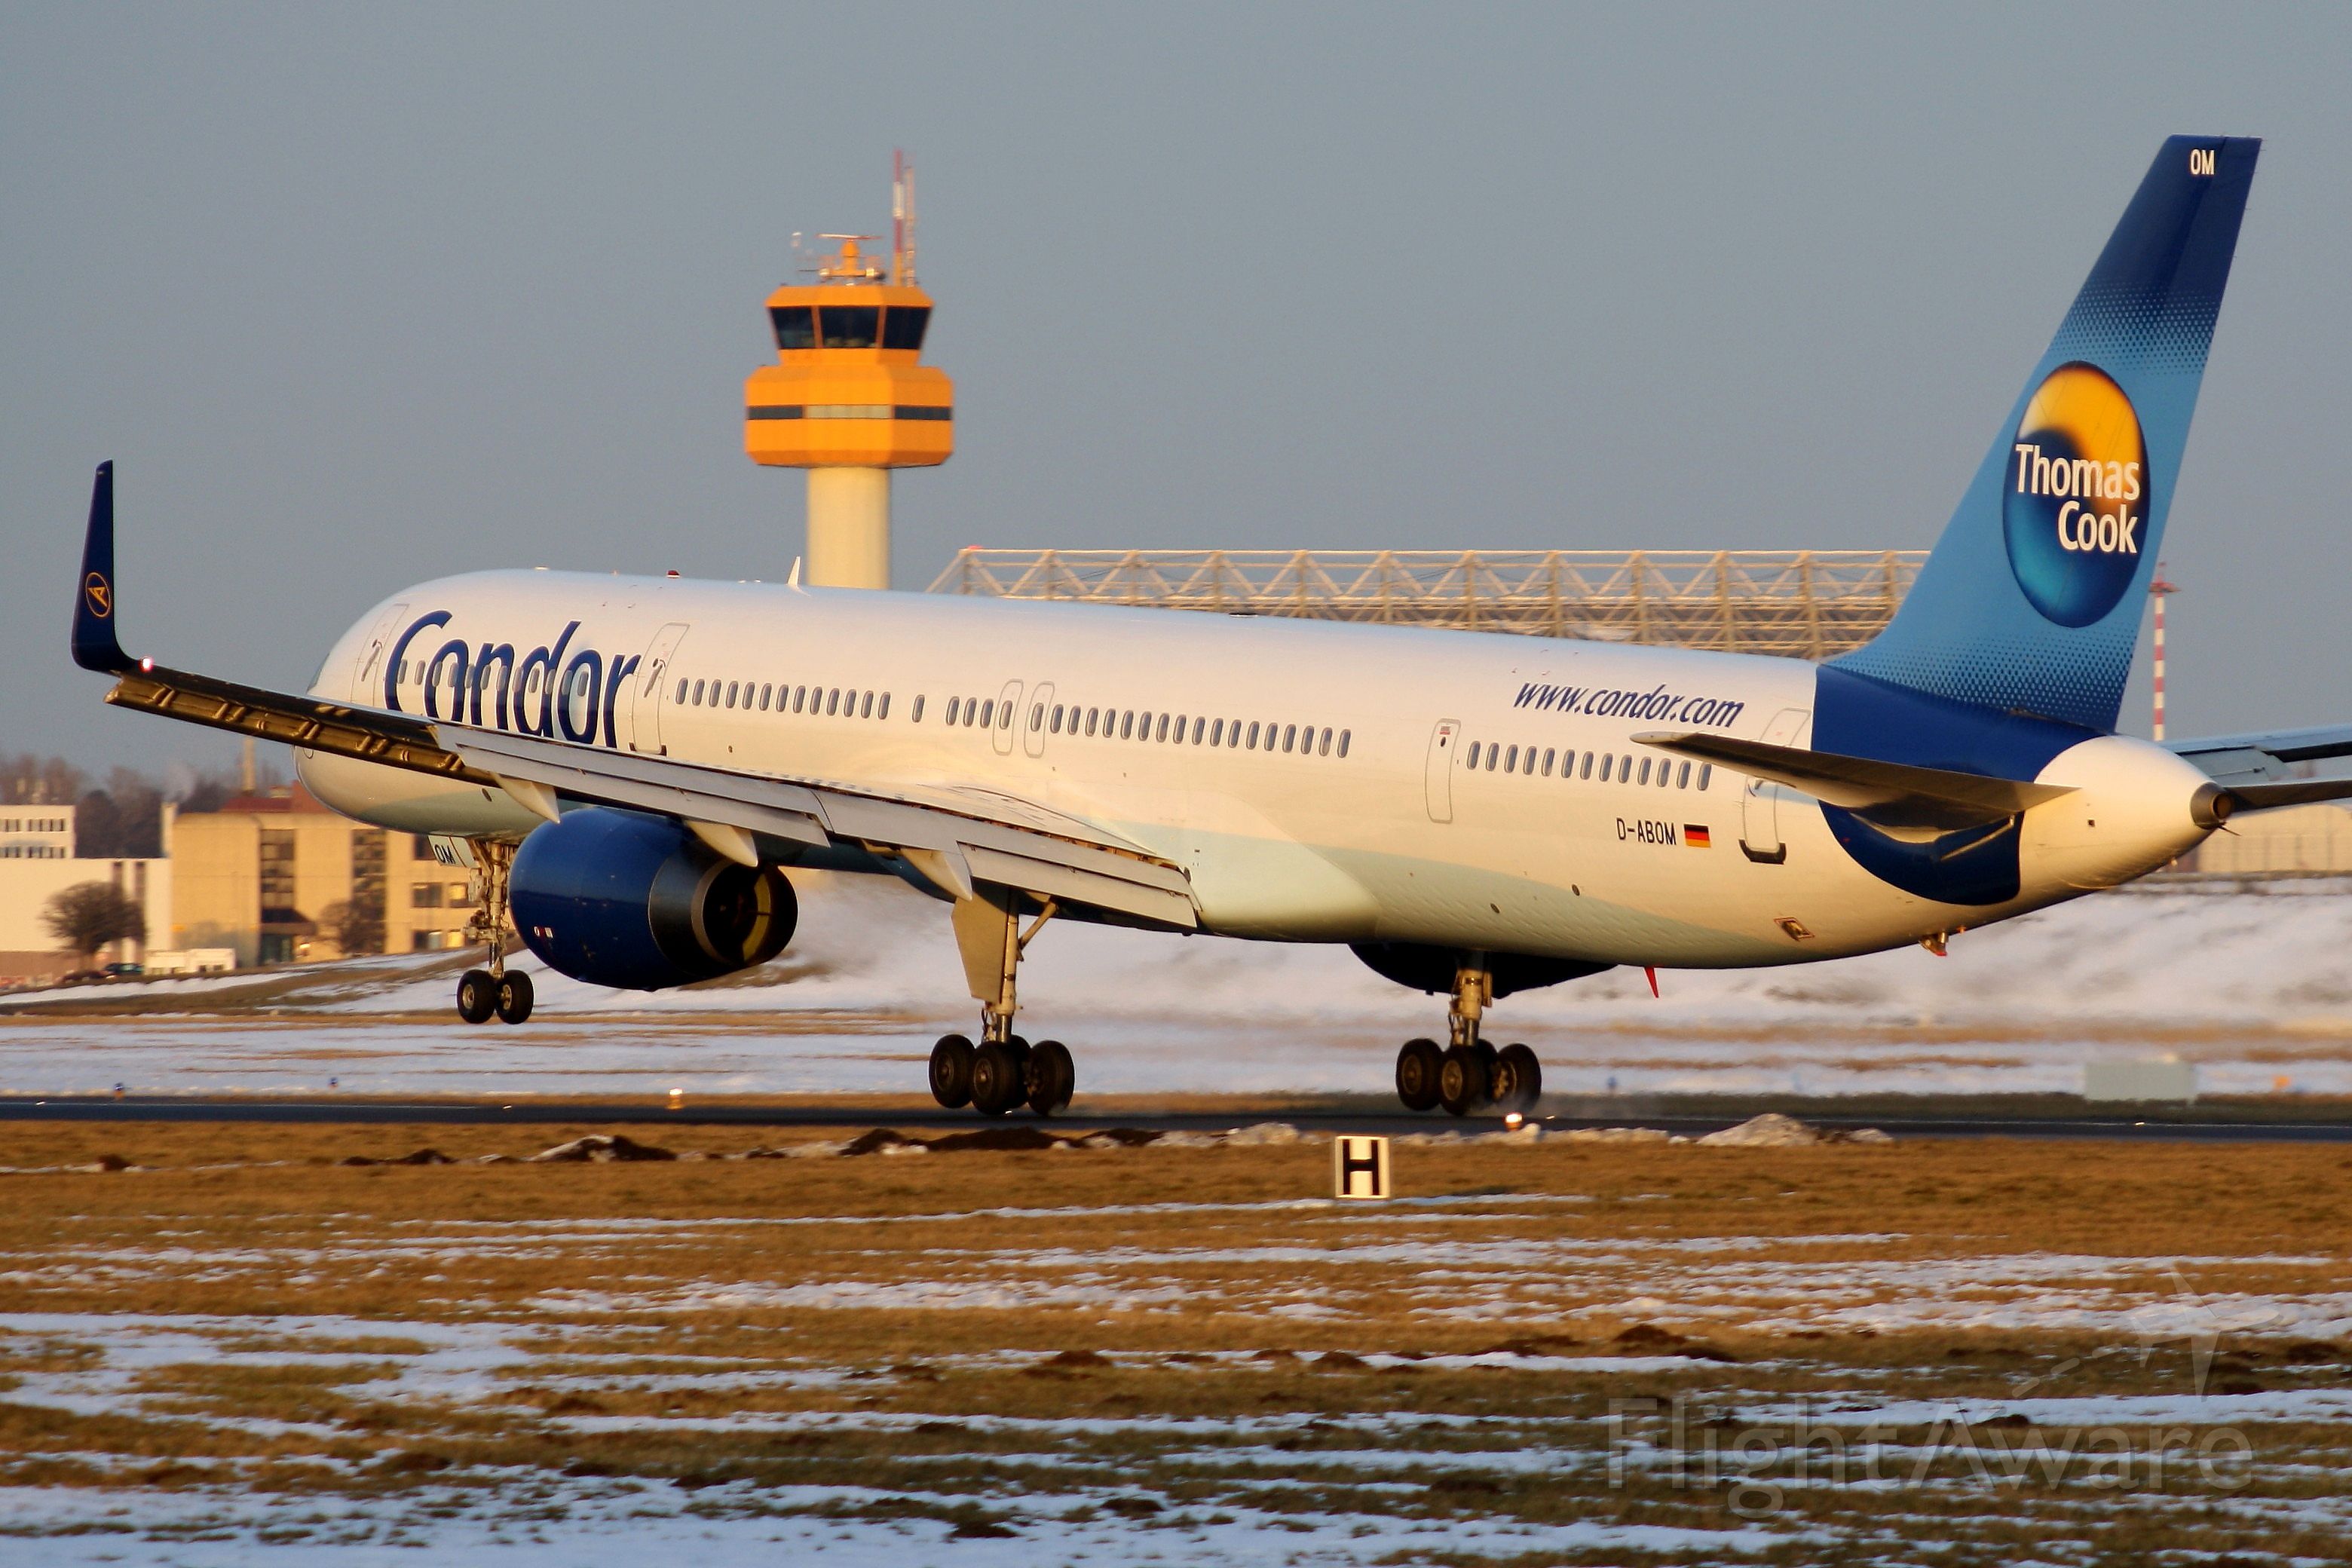 BOEING 757-300 (D-ABOM) - Condor touching down in the last rays of the day after a medium-haul-flight from Tenerife